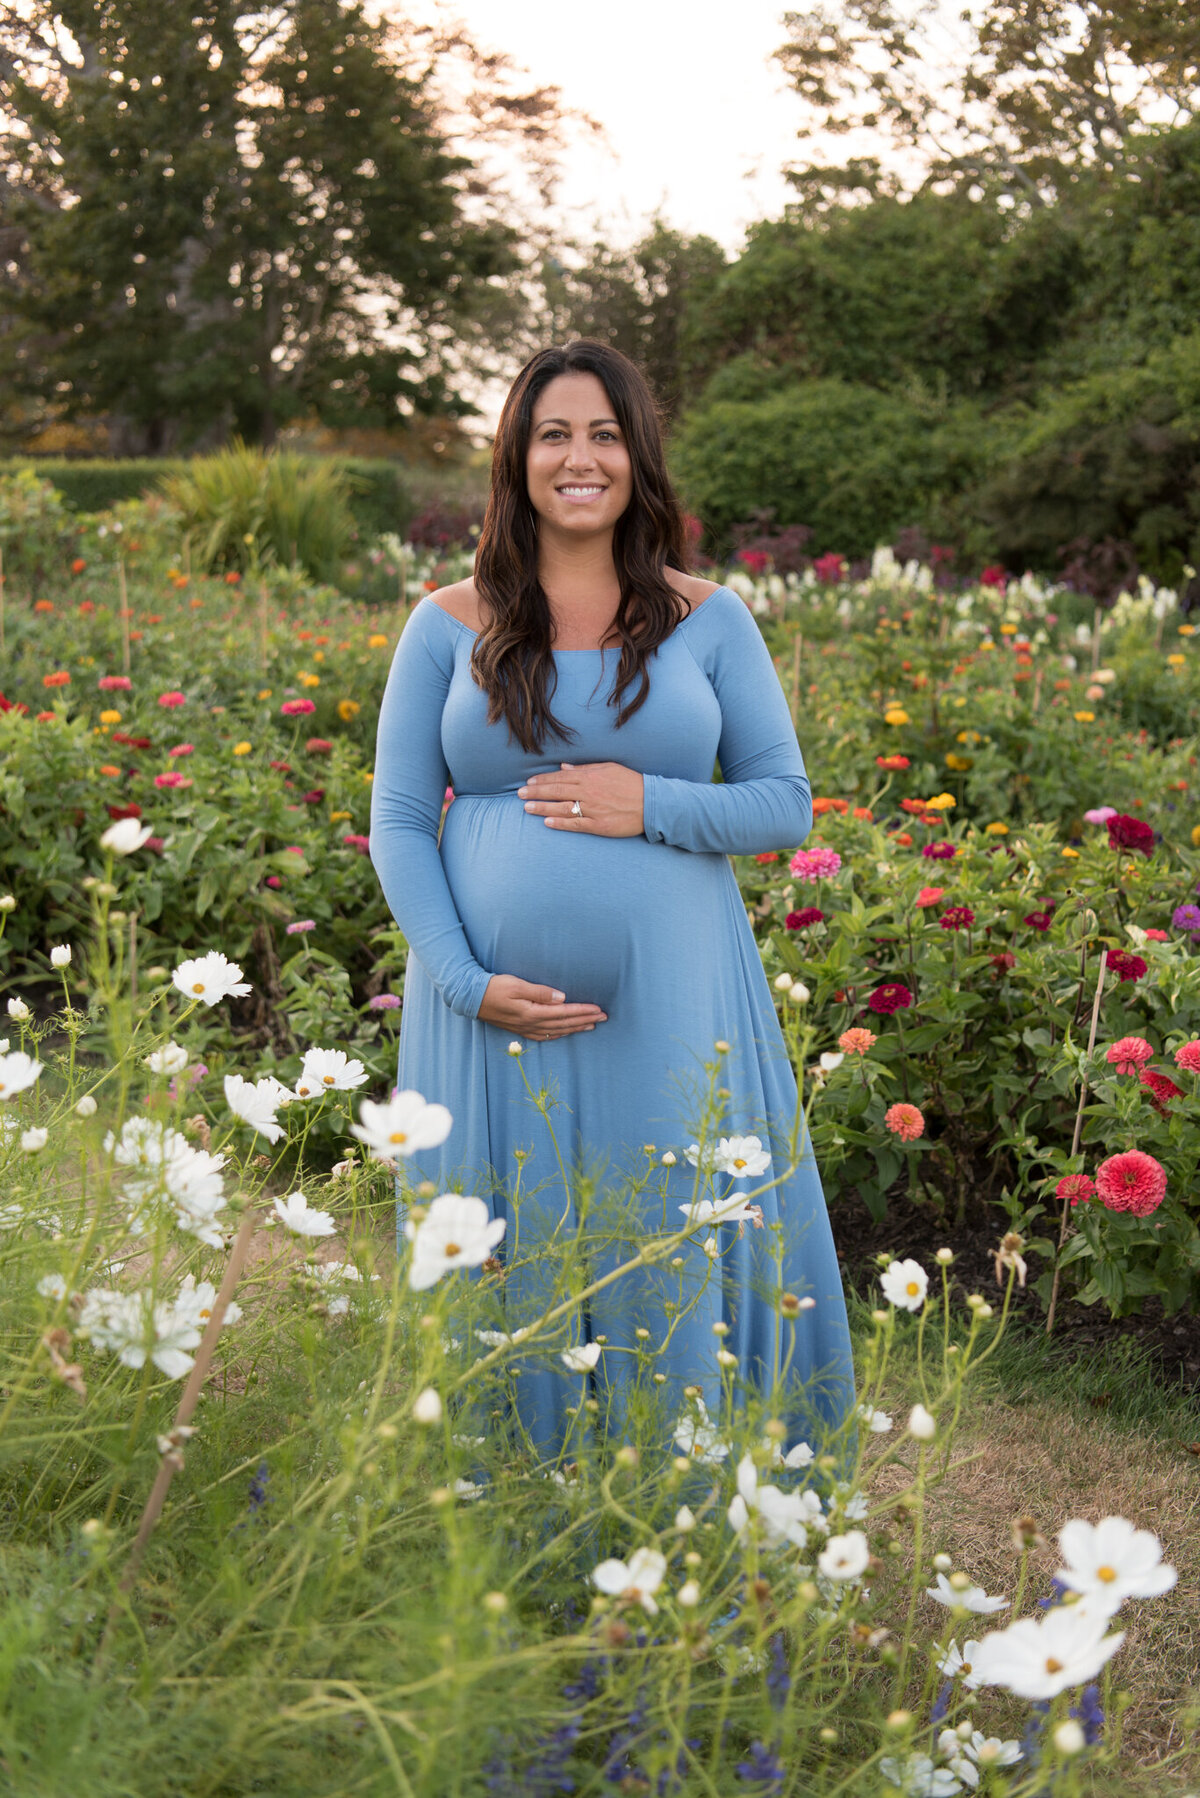 A pregnant mother is smiling at the camera in a garden of wildflowers in bloom